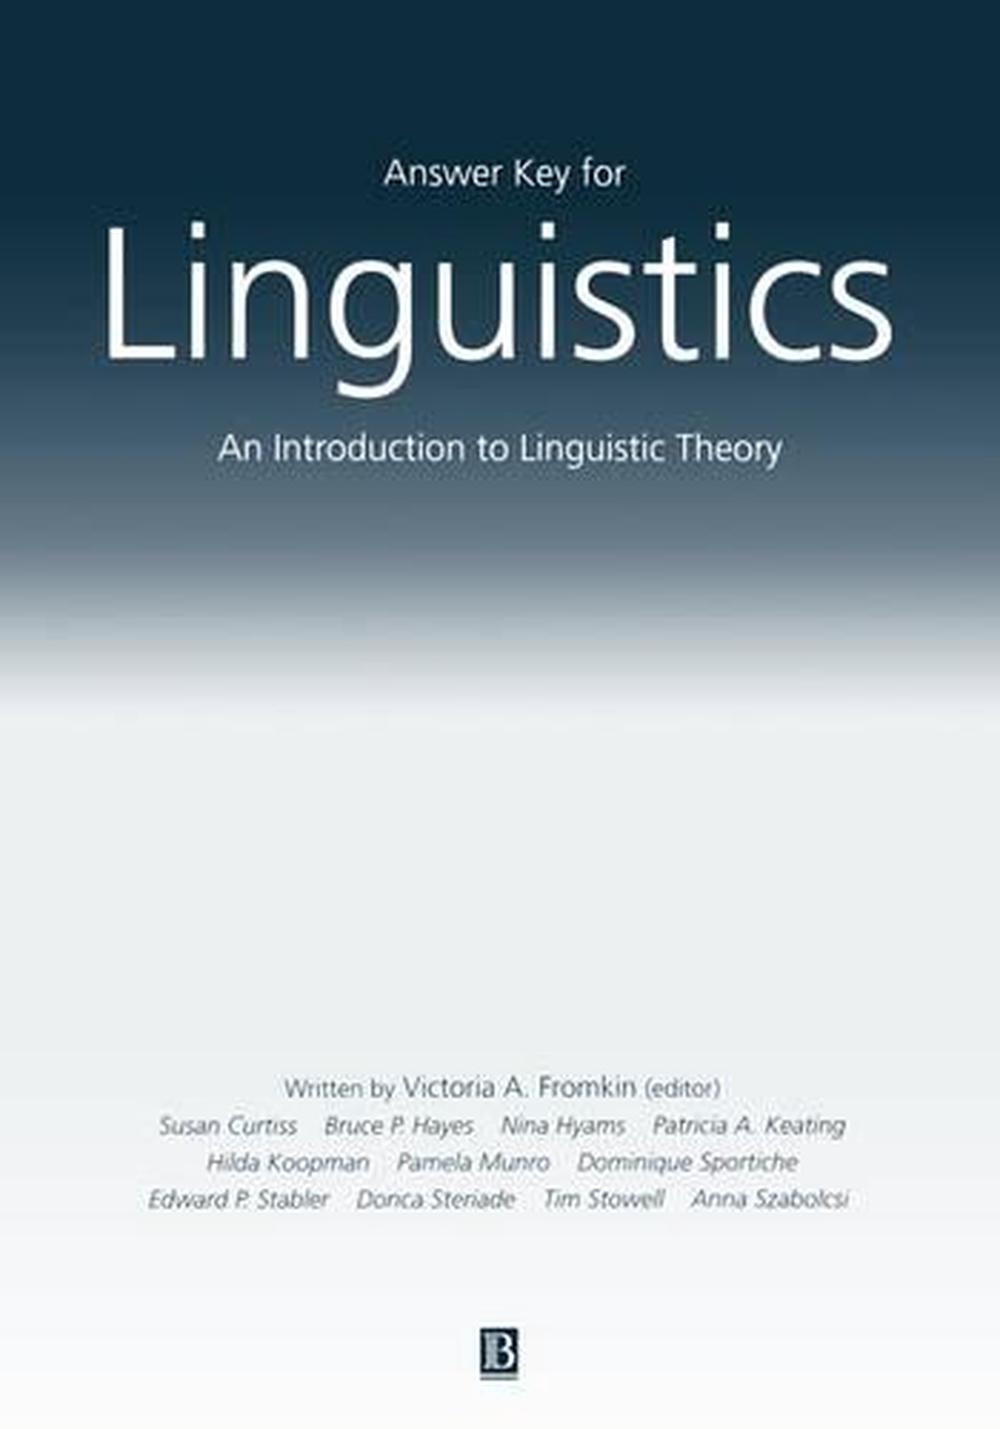 Answer Key for Linguistics An Introduction to Linguistic Theory by Bruce Hayes 9780631228493 eBay